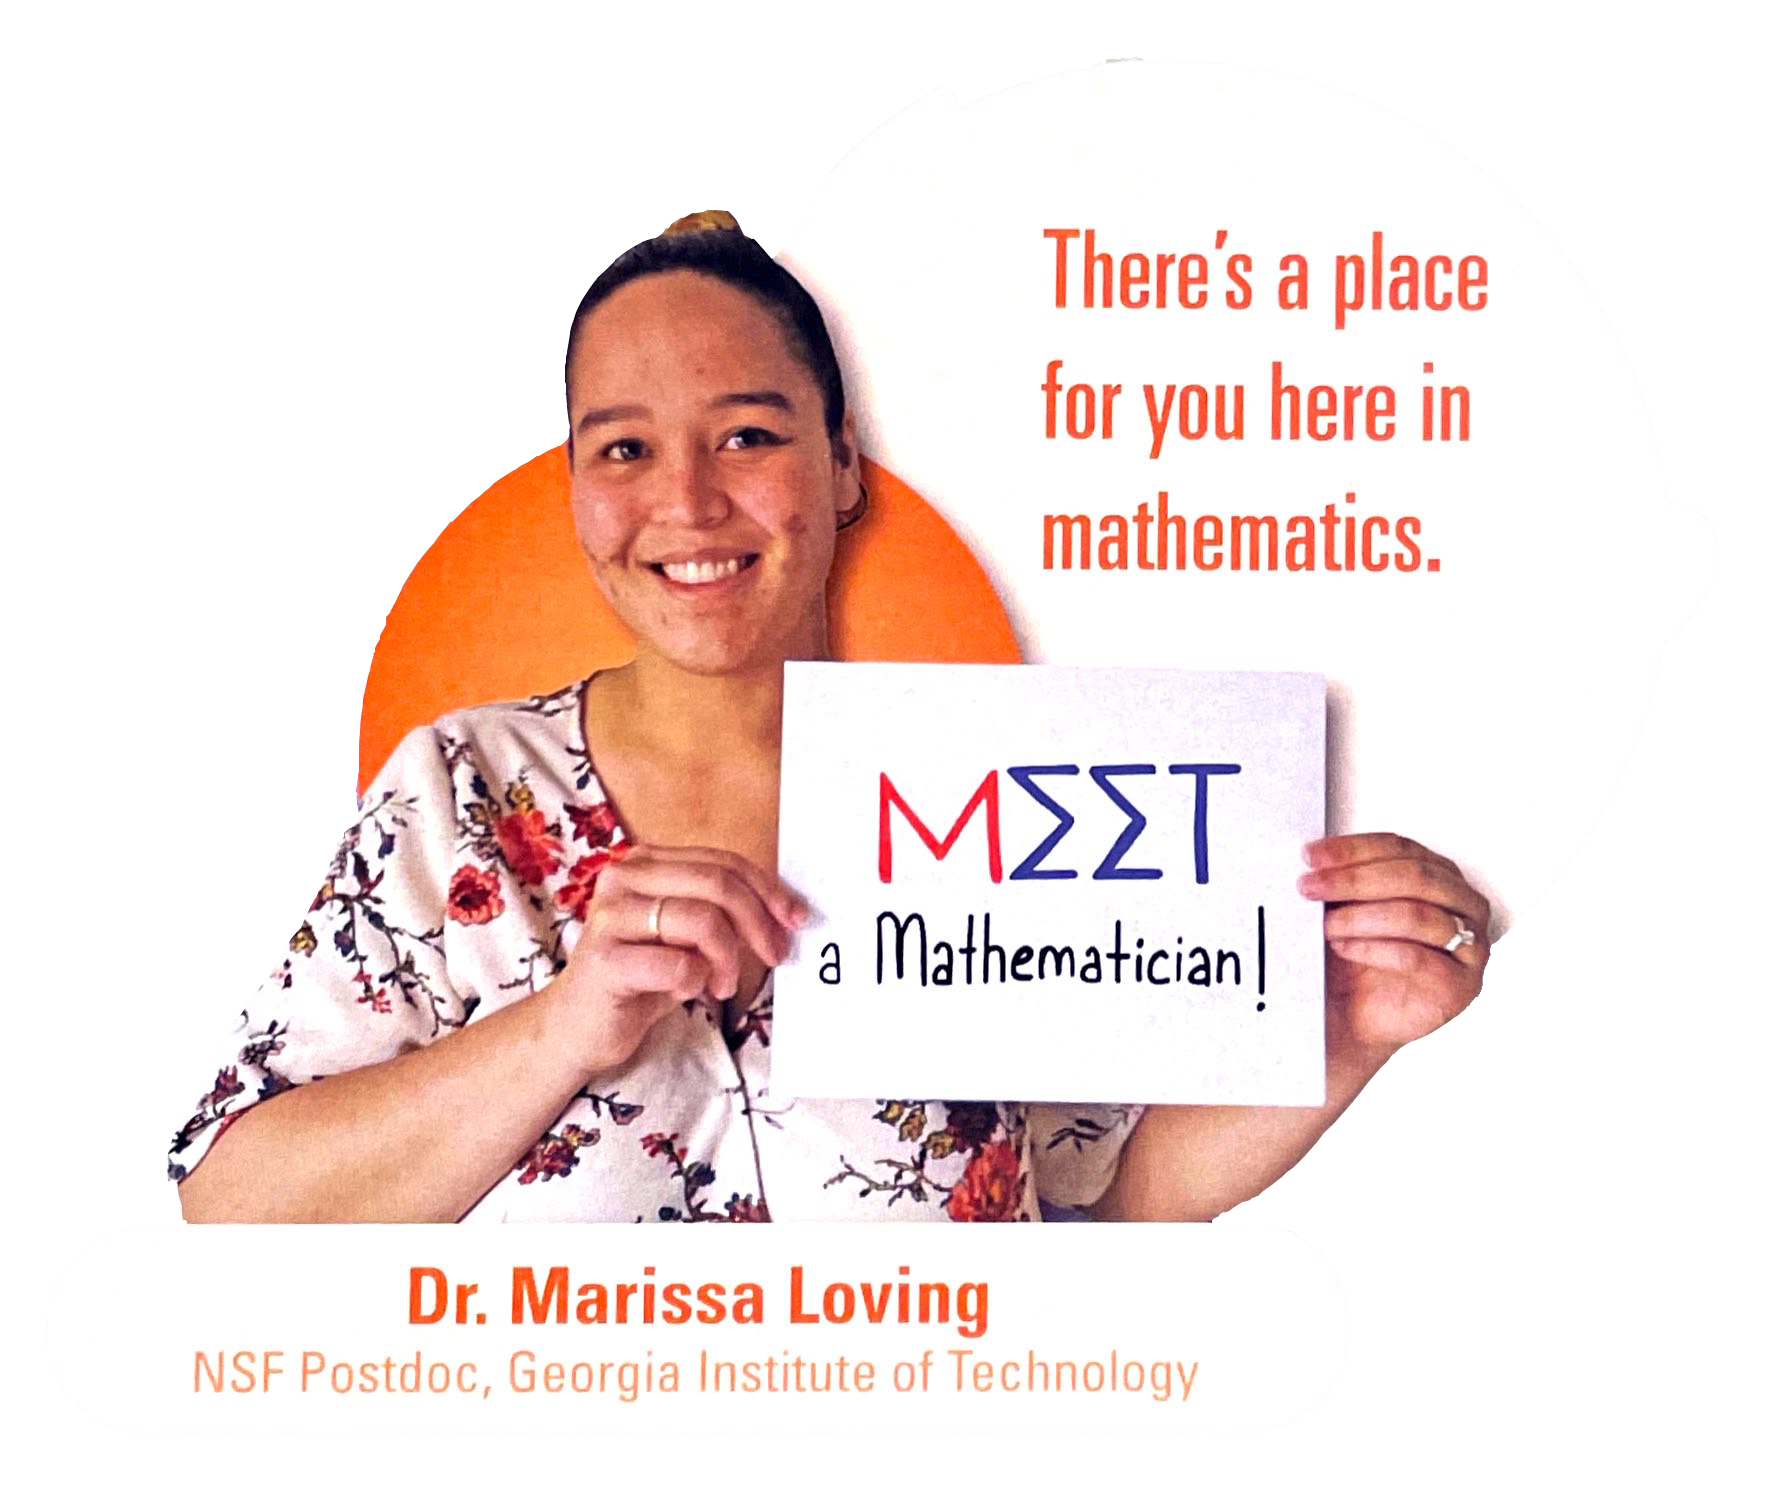 Spotlight: Meet a Mathematician - Dr. Marissa Loving, NSF Postdoc, Georgia Institute of Technology. "There's a place for you here in mathematics."